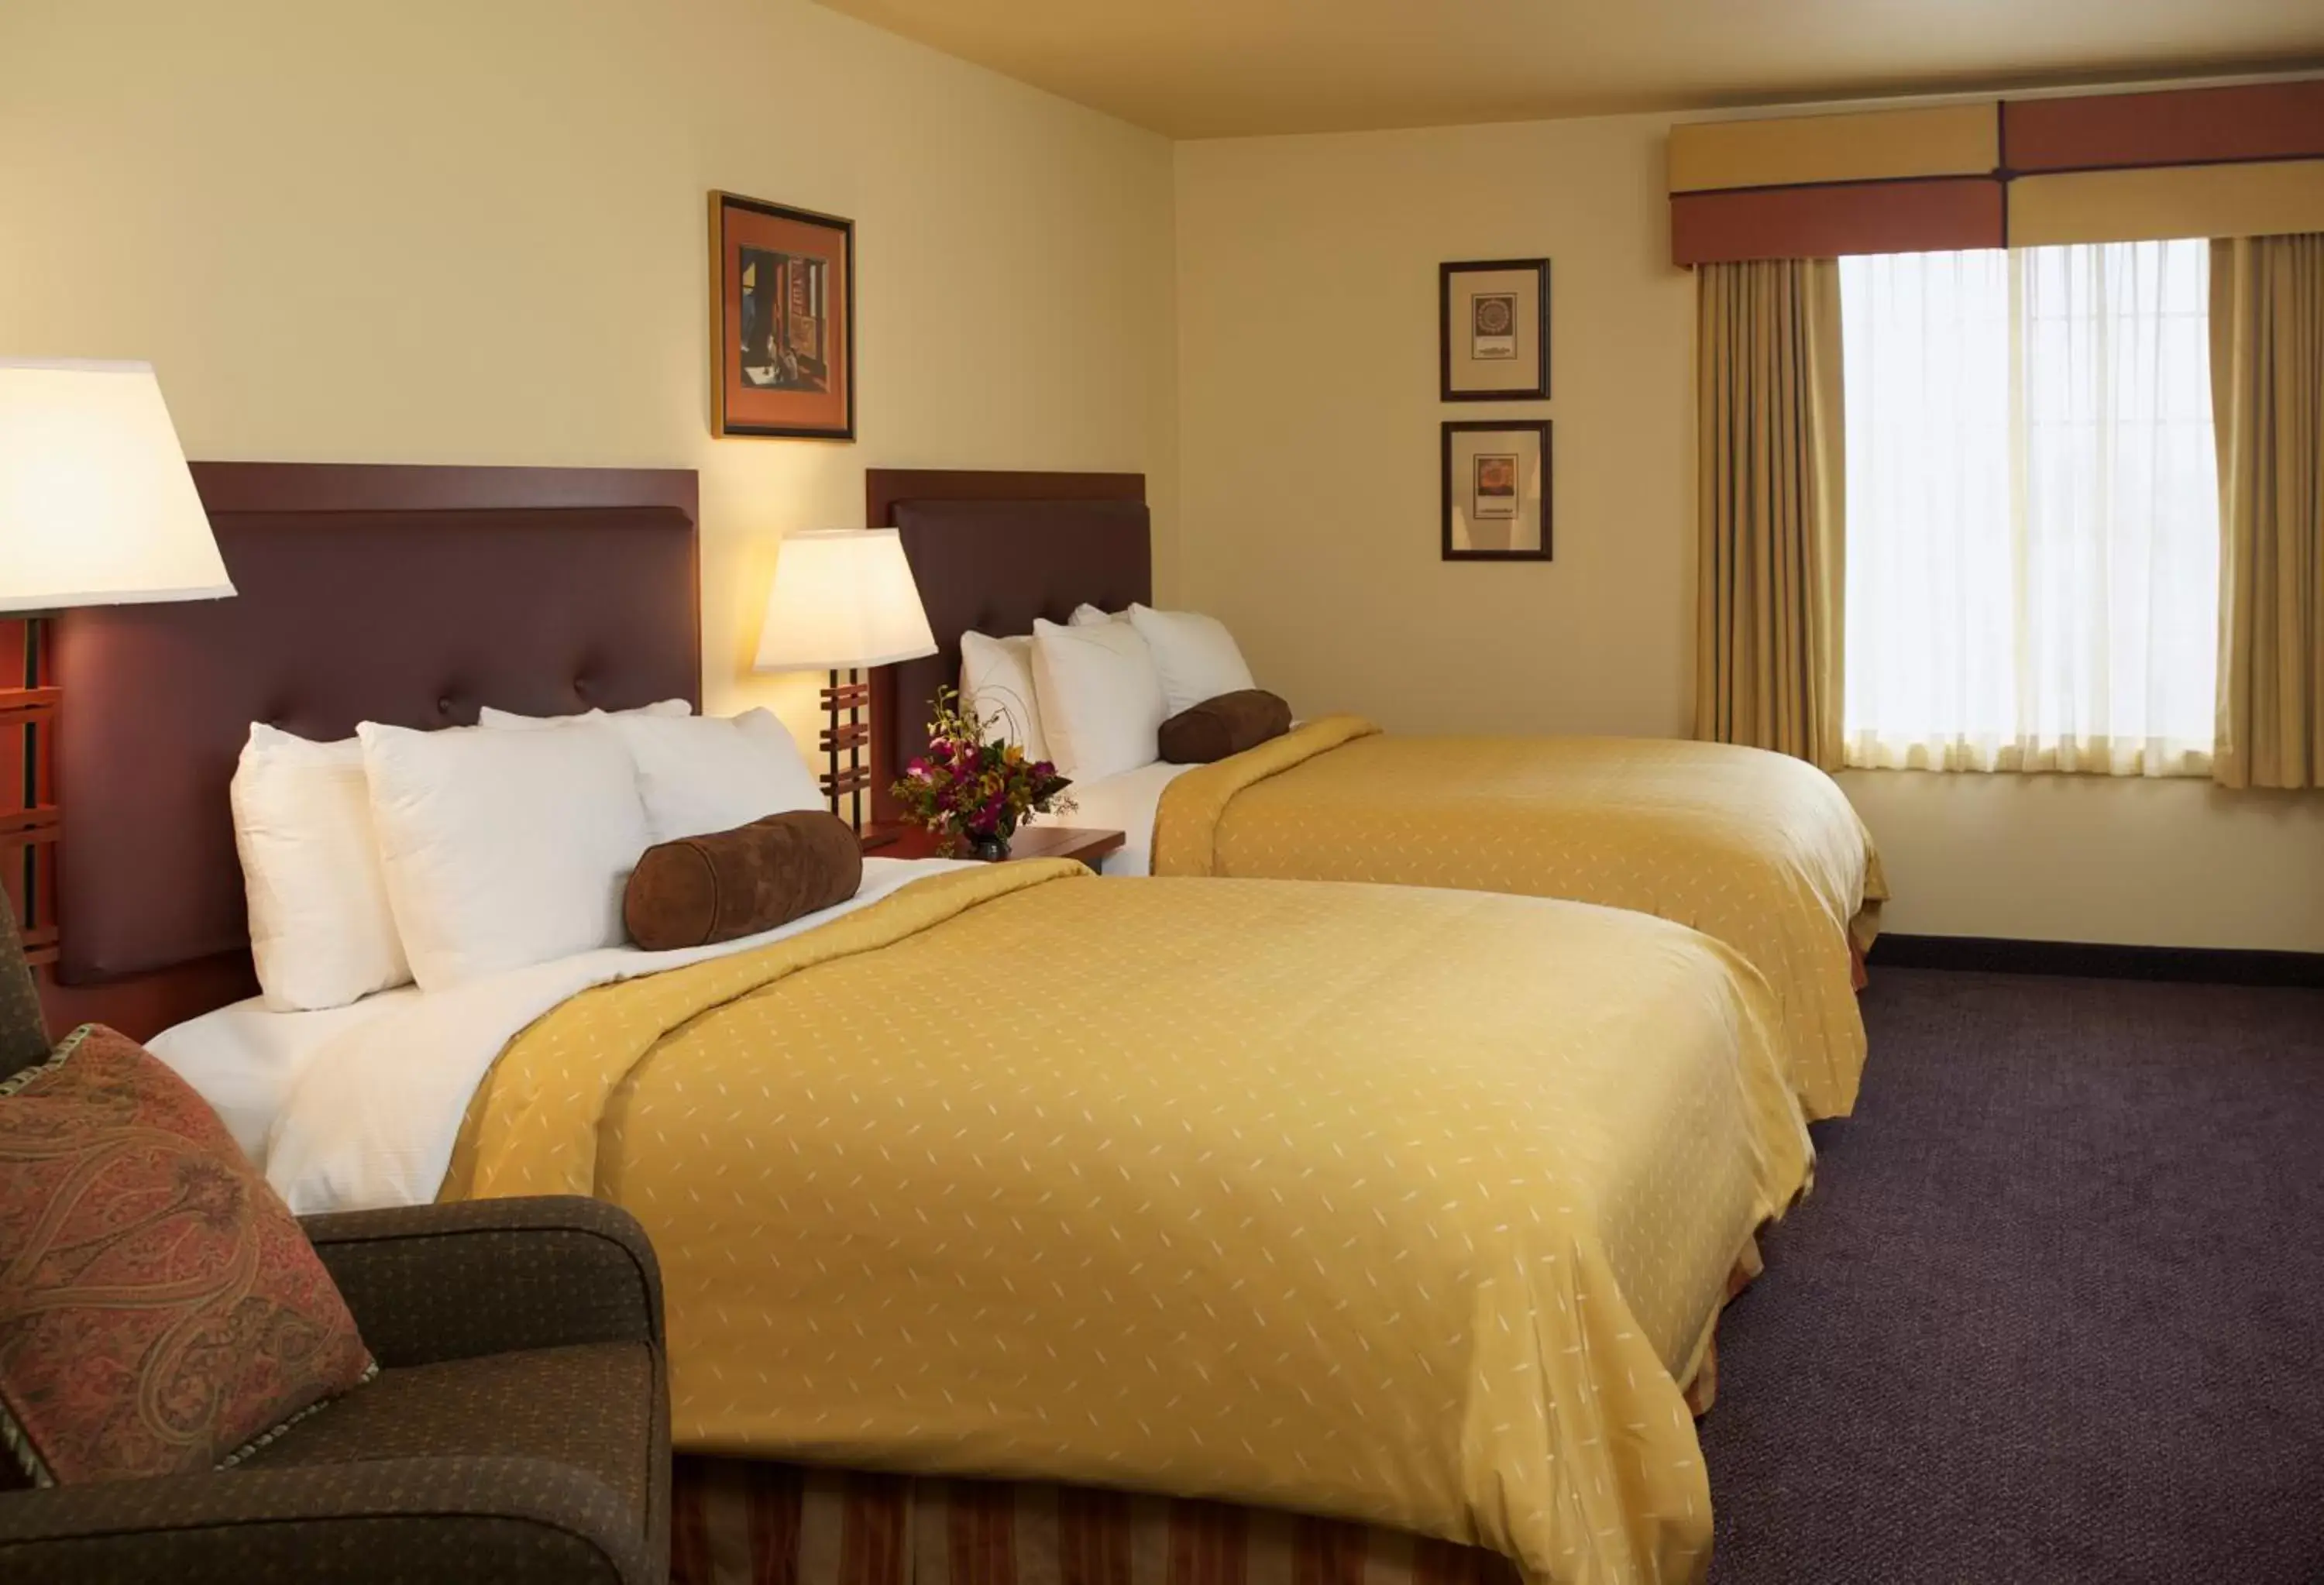 Grand Suite in Larkspur Landing Campbell-An All-Suite Hotel